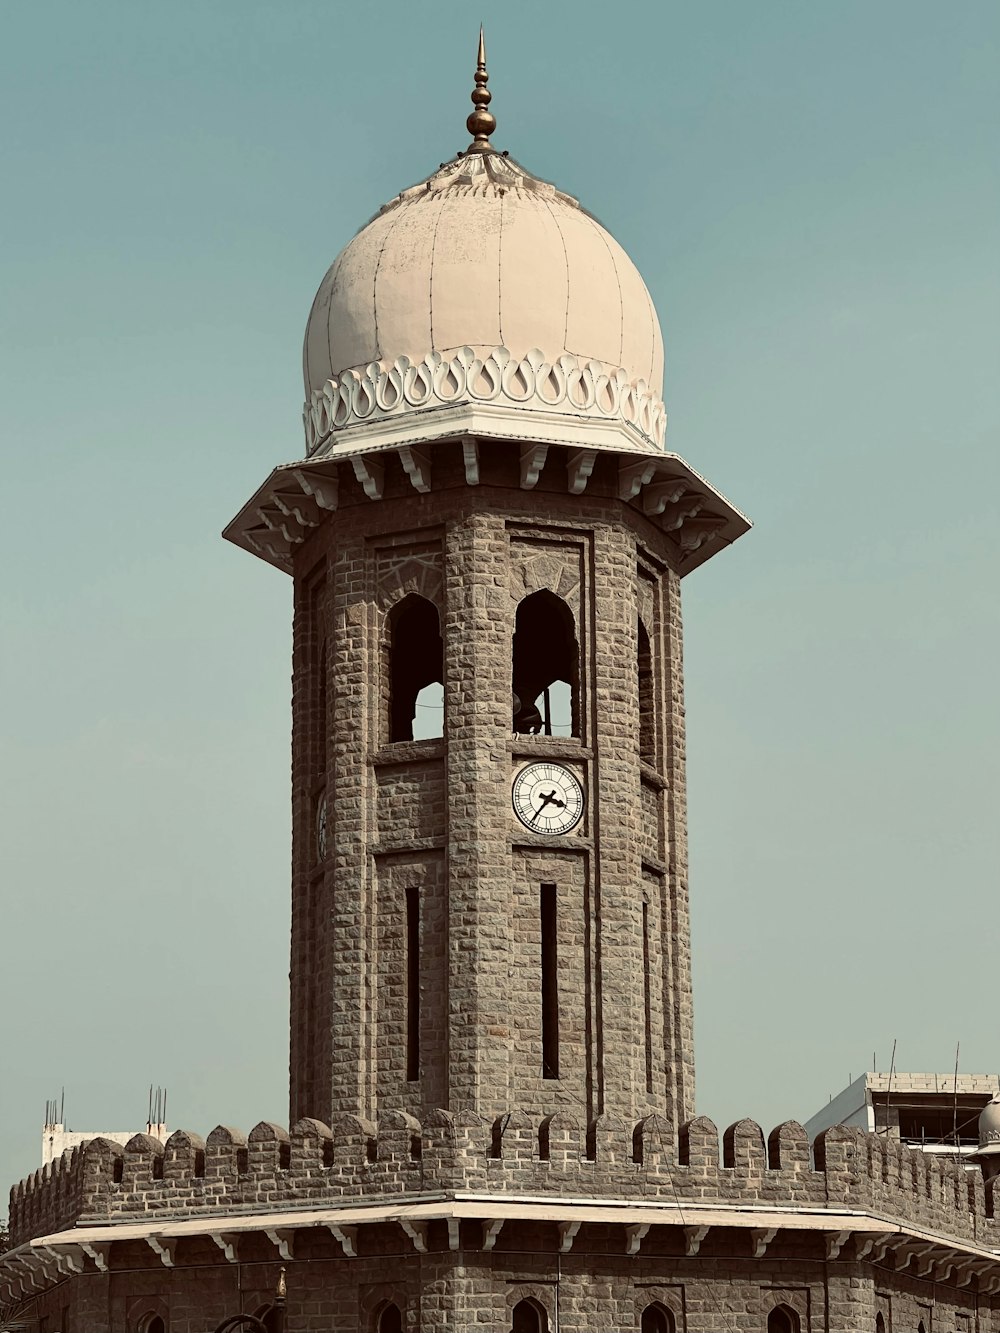 a large tower with a clock on the top of it